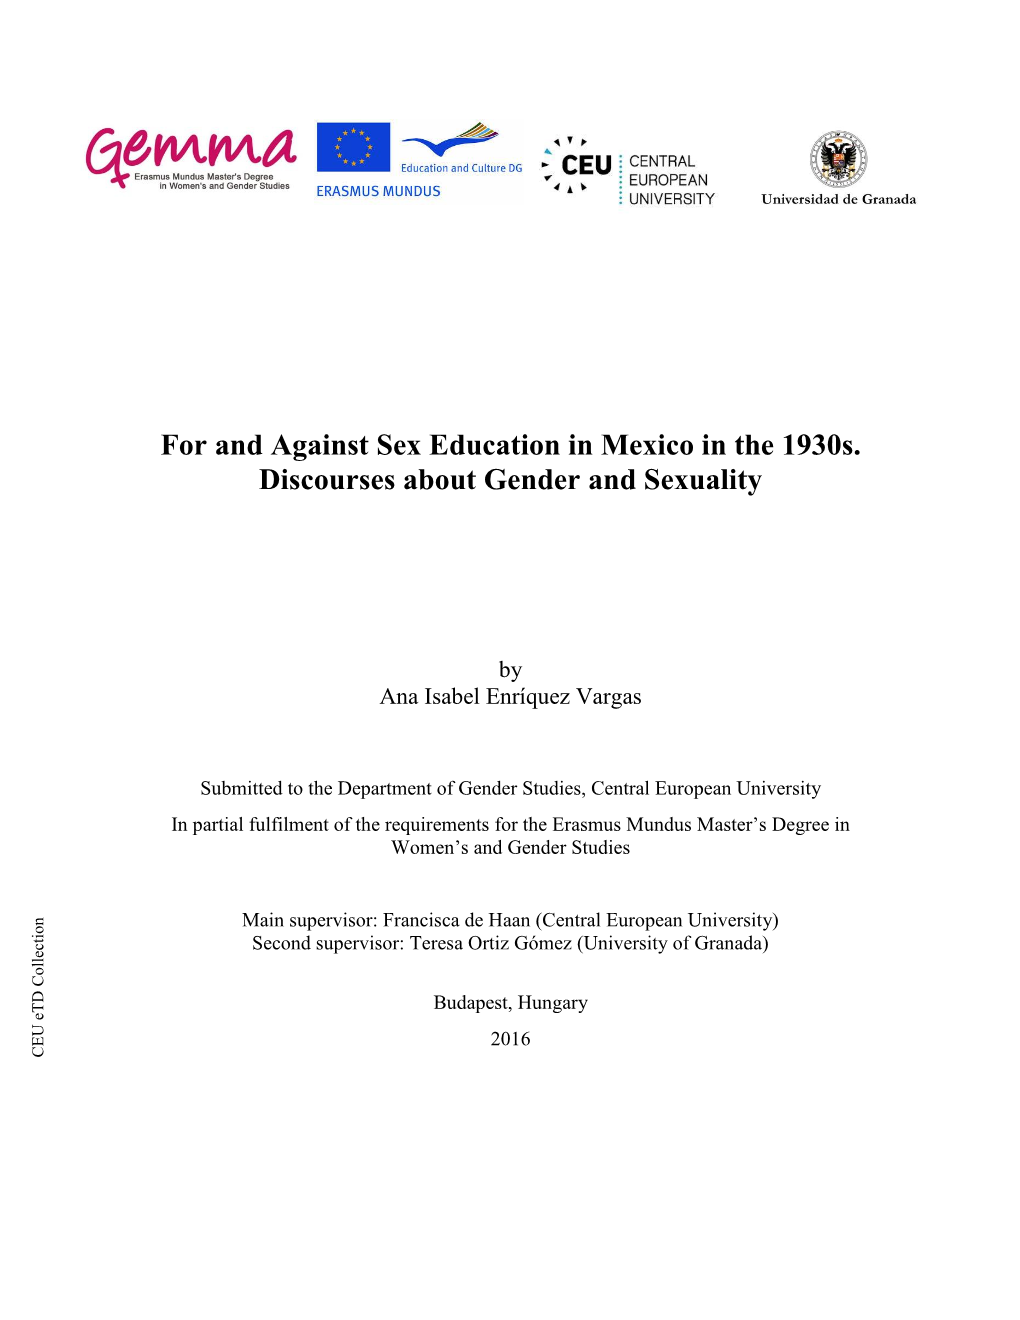 For and Against Sex Education in Mexico in the 1930S. Discourses About Gender and Sexuality